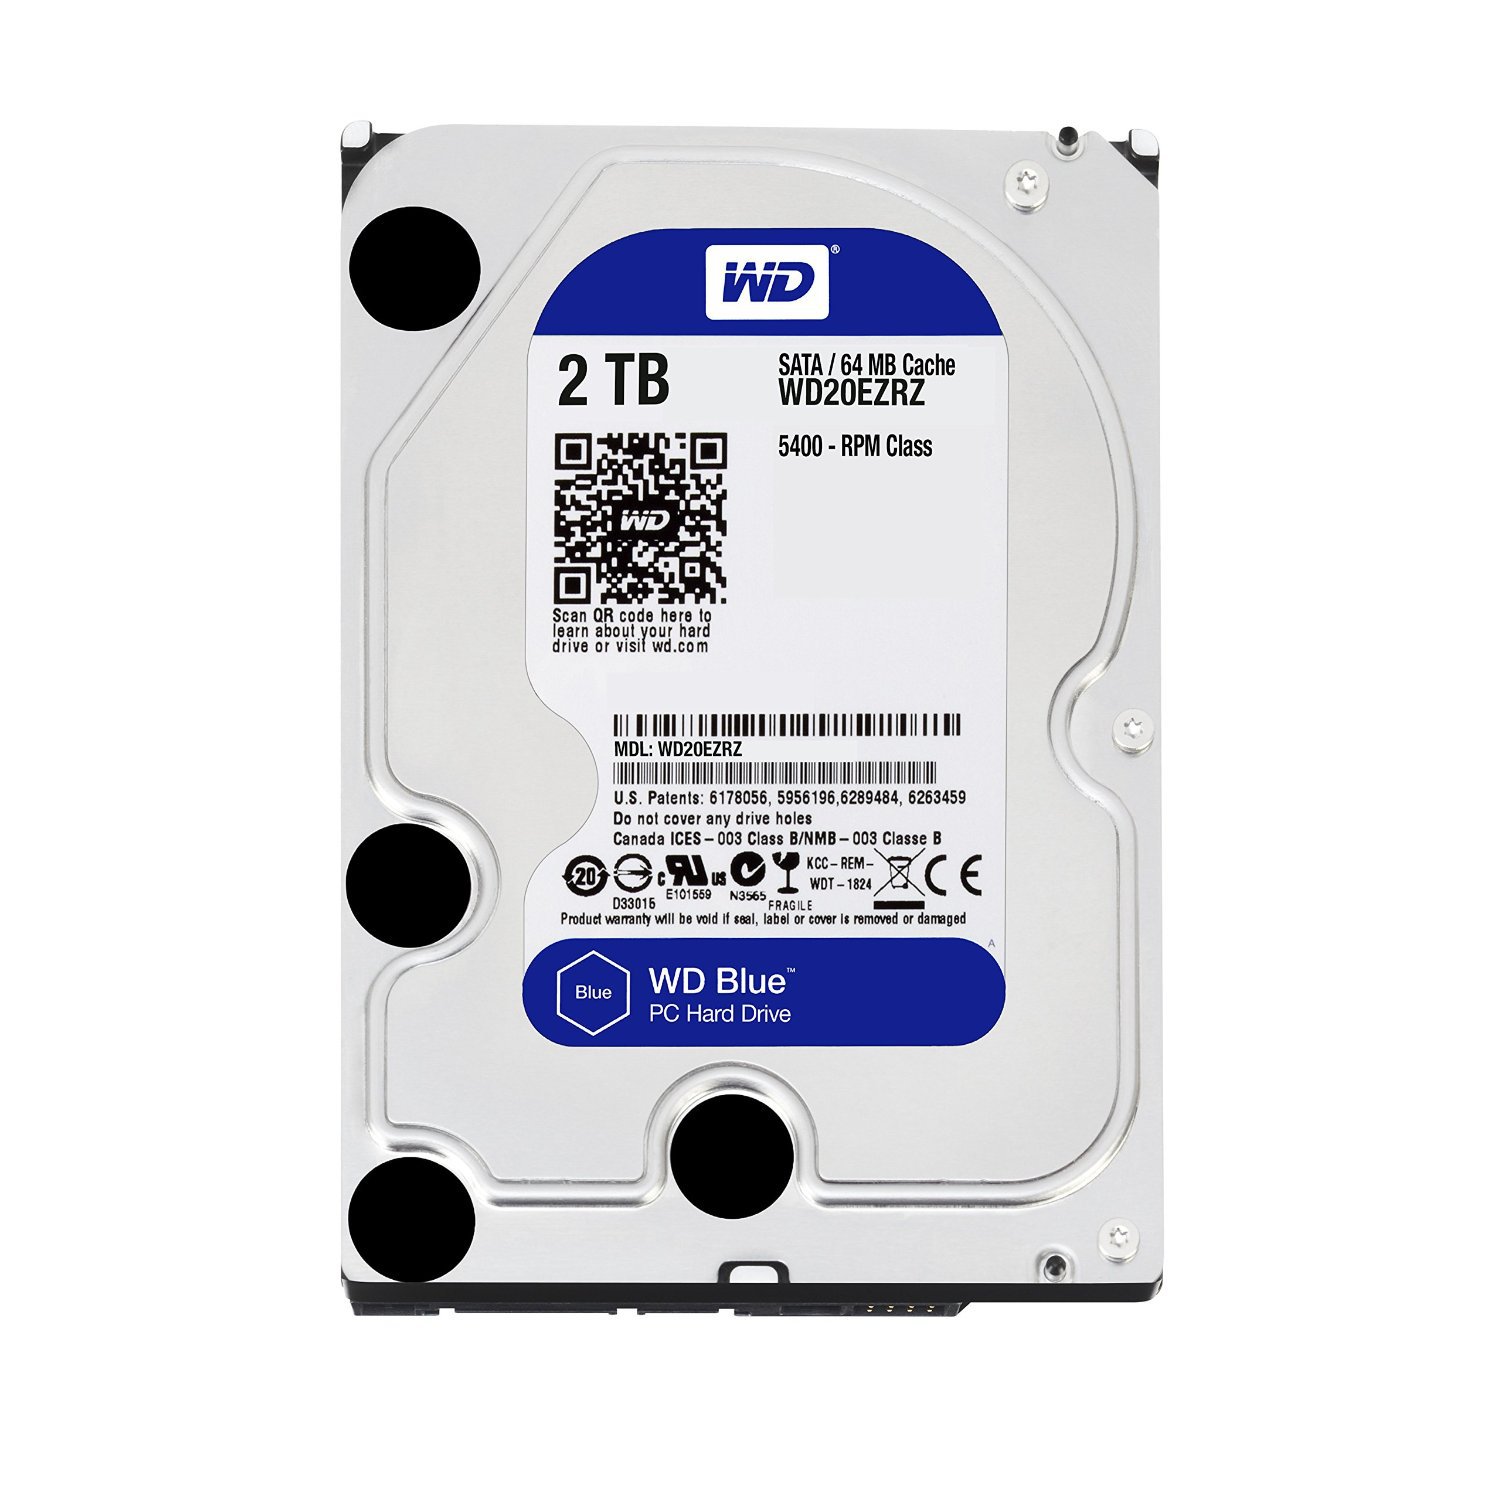 Ổ cứng HDD WD 2TB Blue 3.5 inch, 5400RPM, SATA3, 256MB Cache